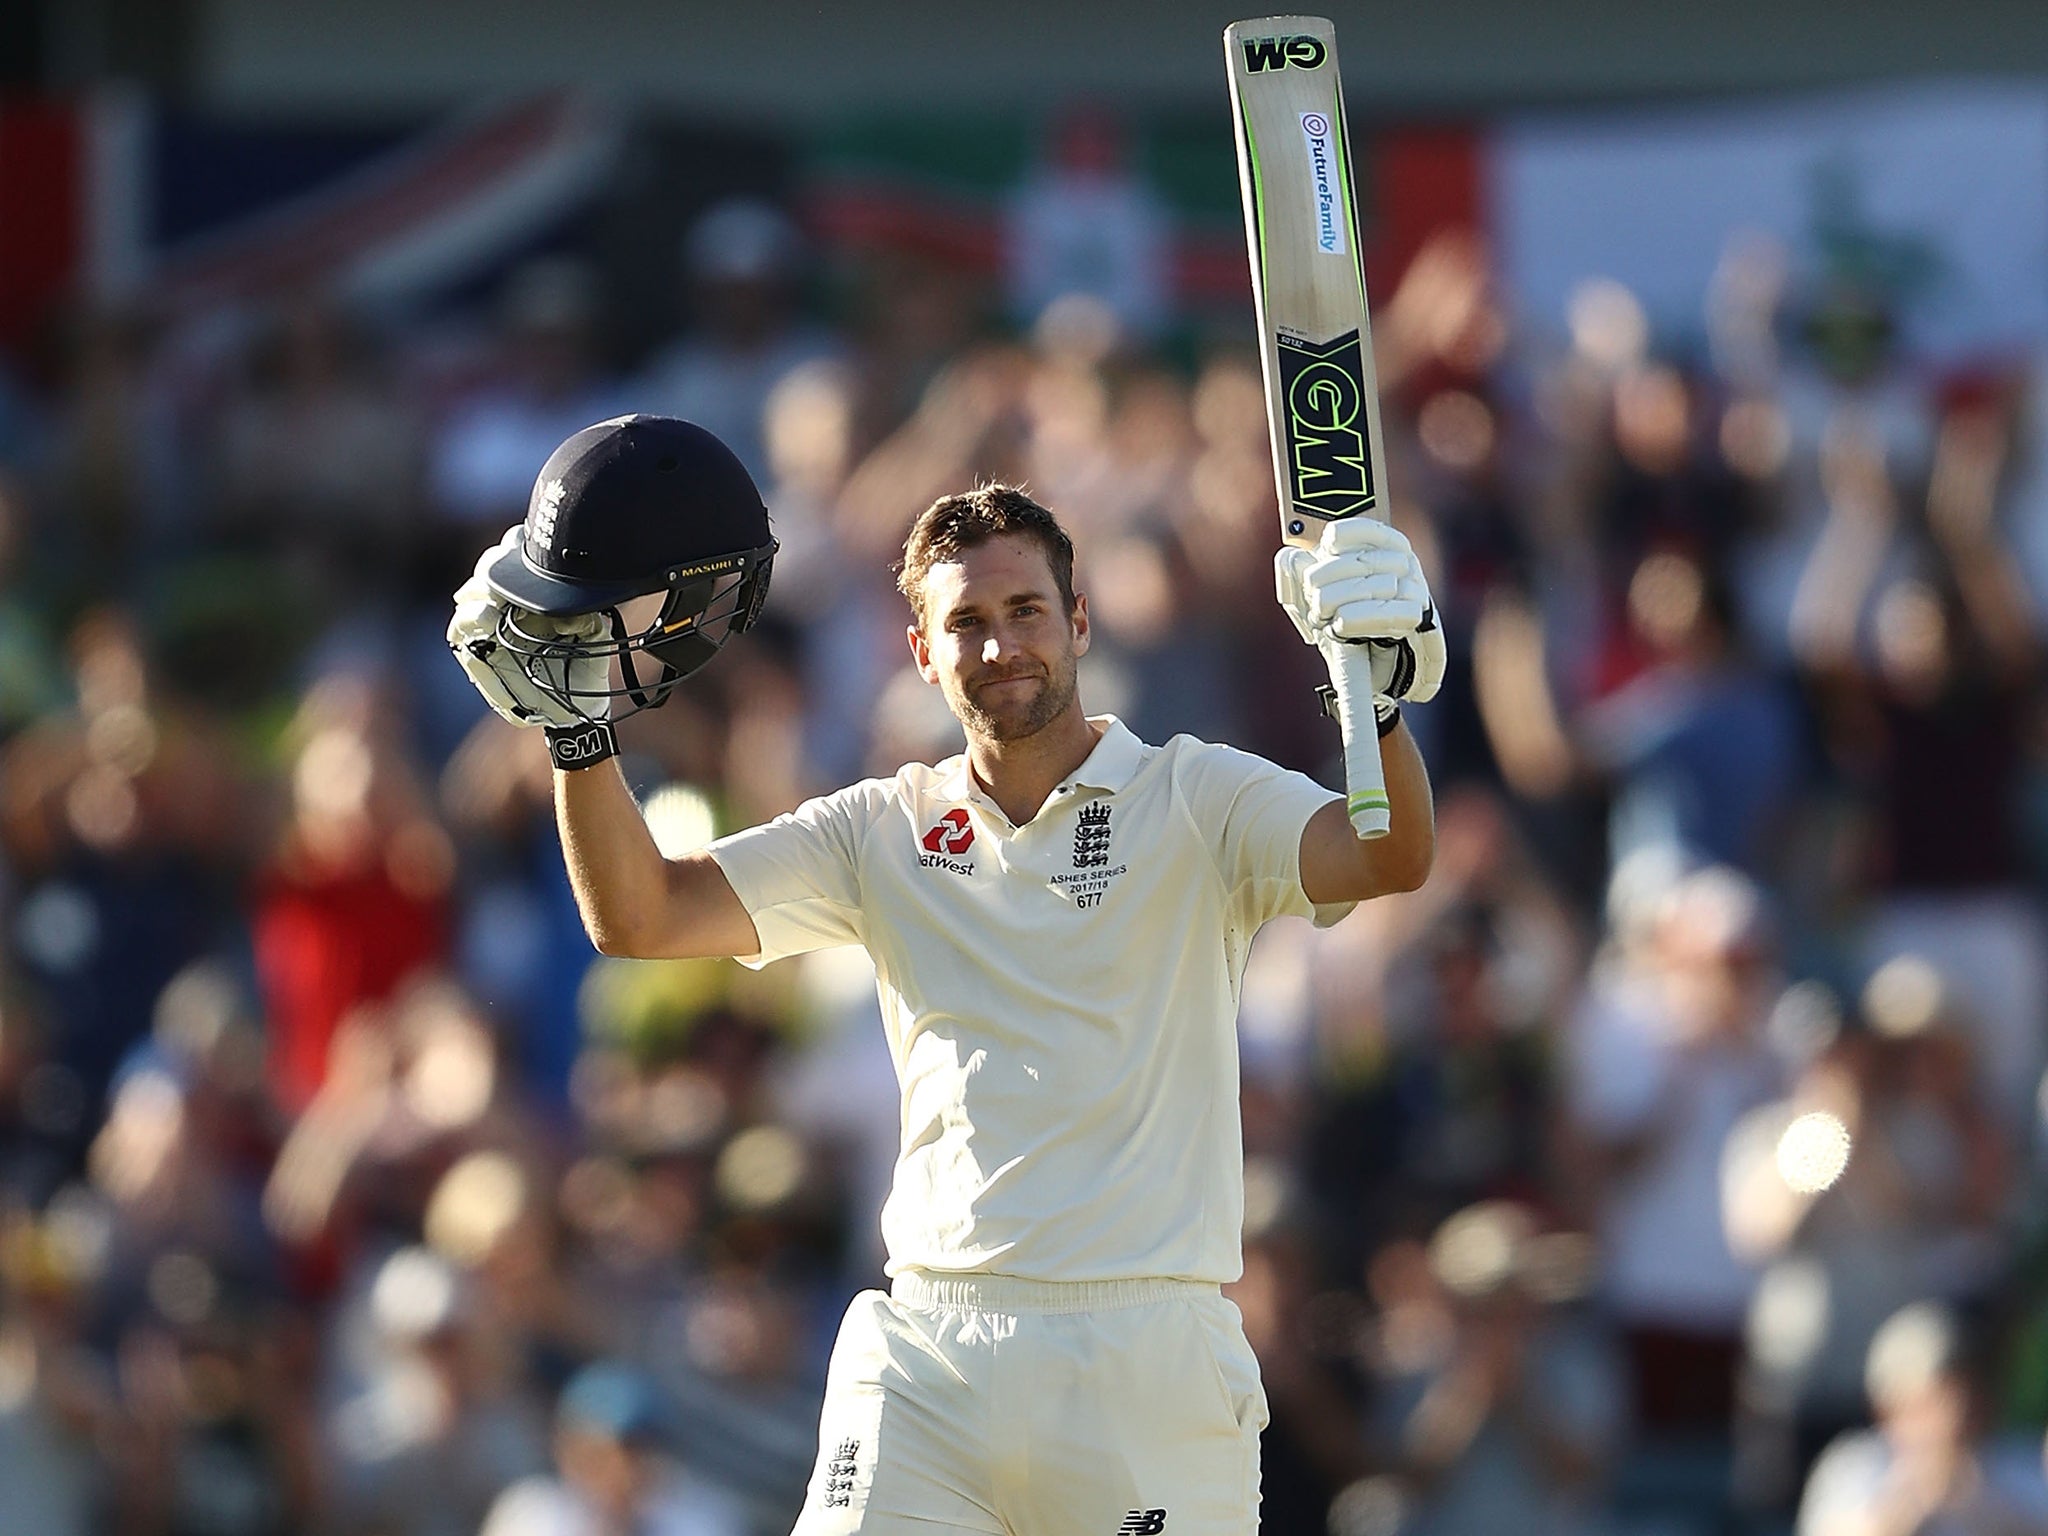 Dawid Malan hit a superb century to put England in a strong position on day one in Perth